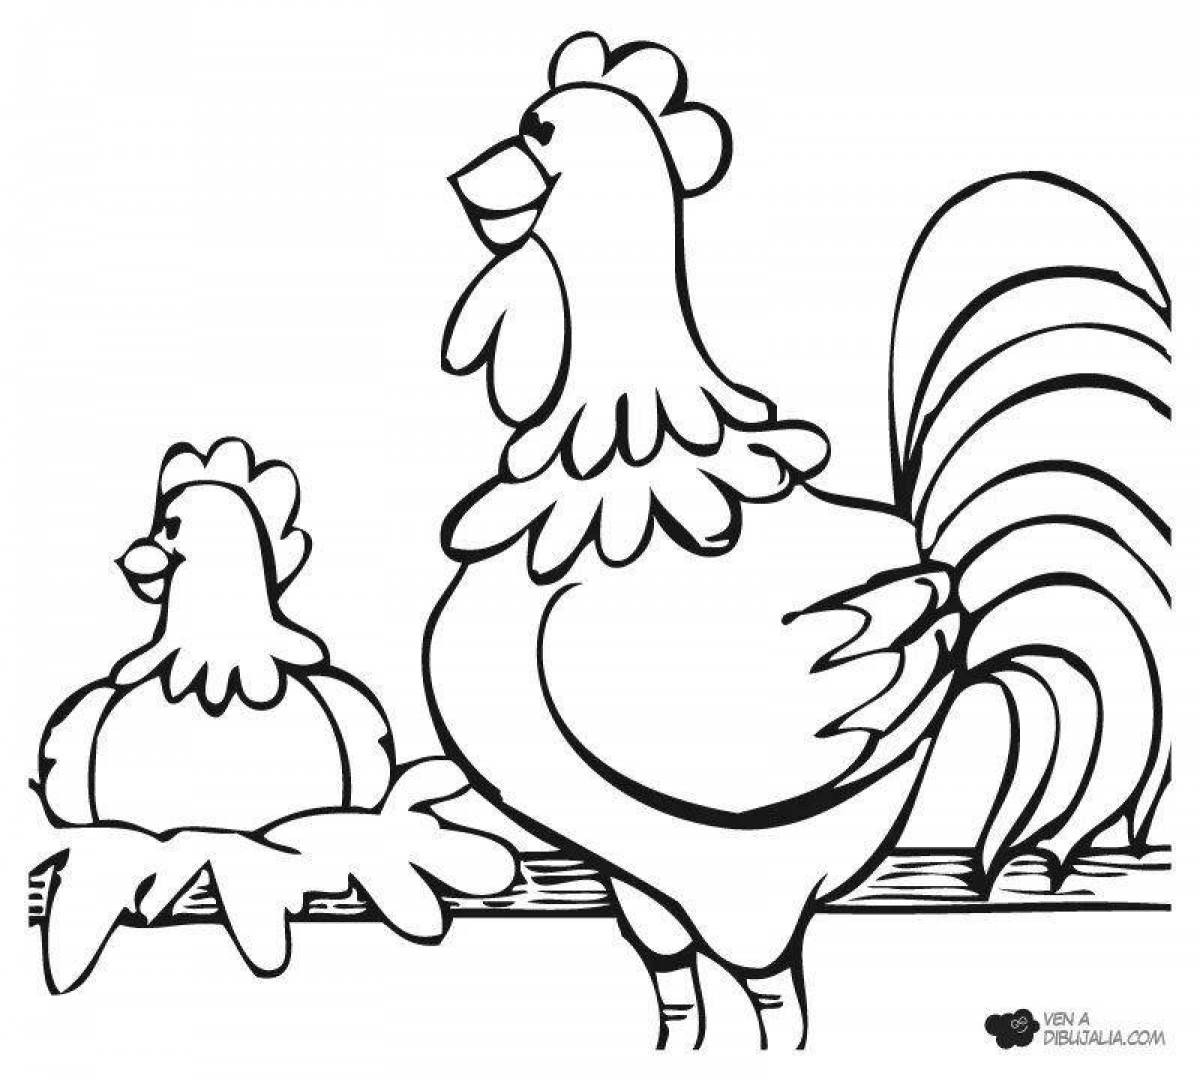 Weird rooster and hen coloring book